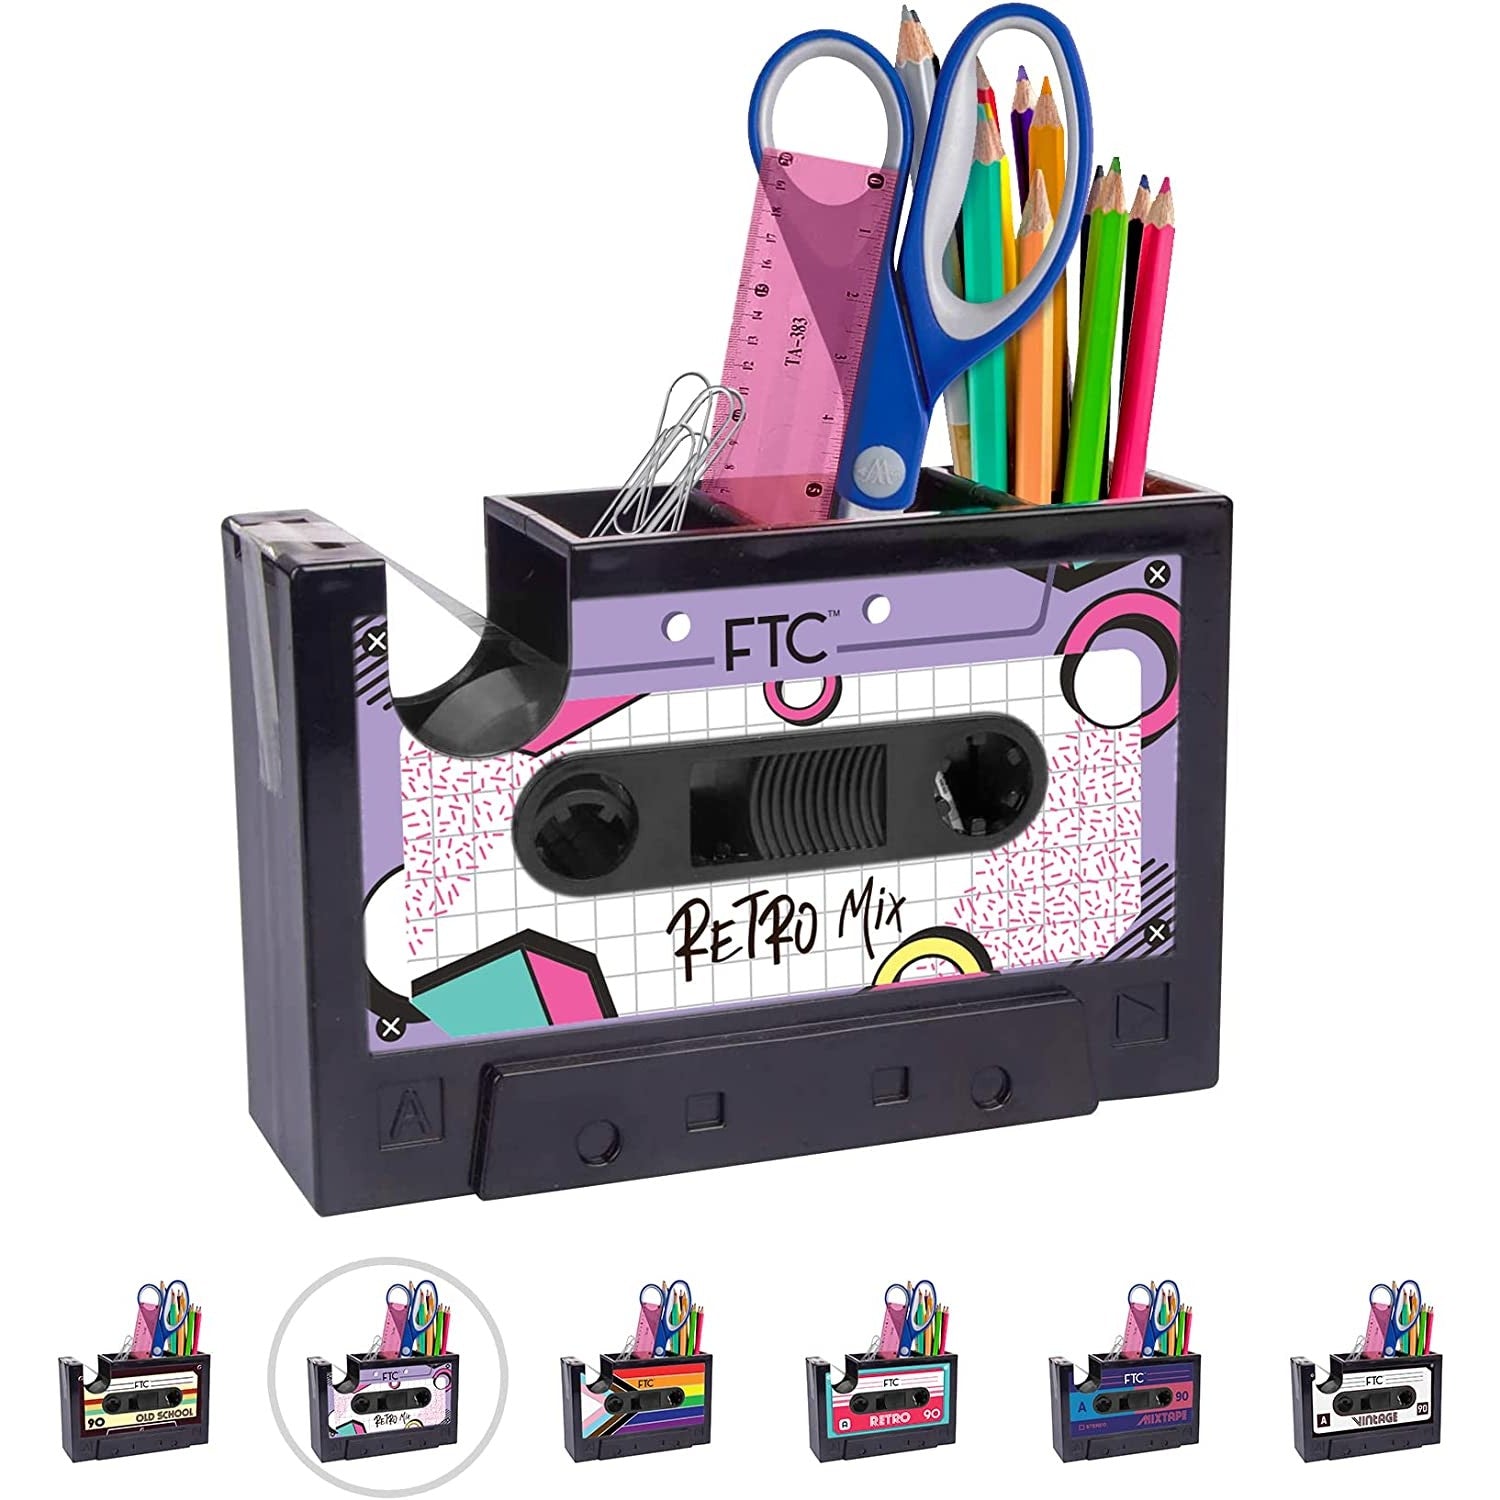 Rock your workspace with this retro cassette tape dispenser and statio –